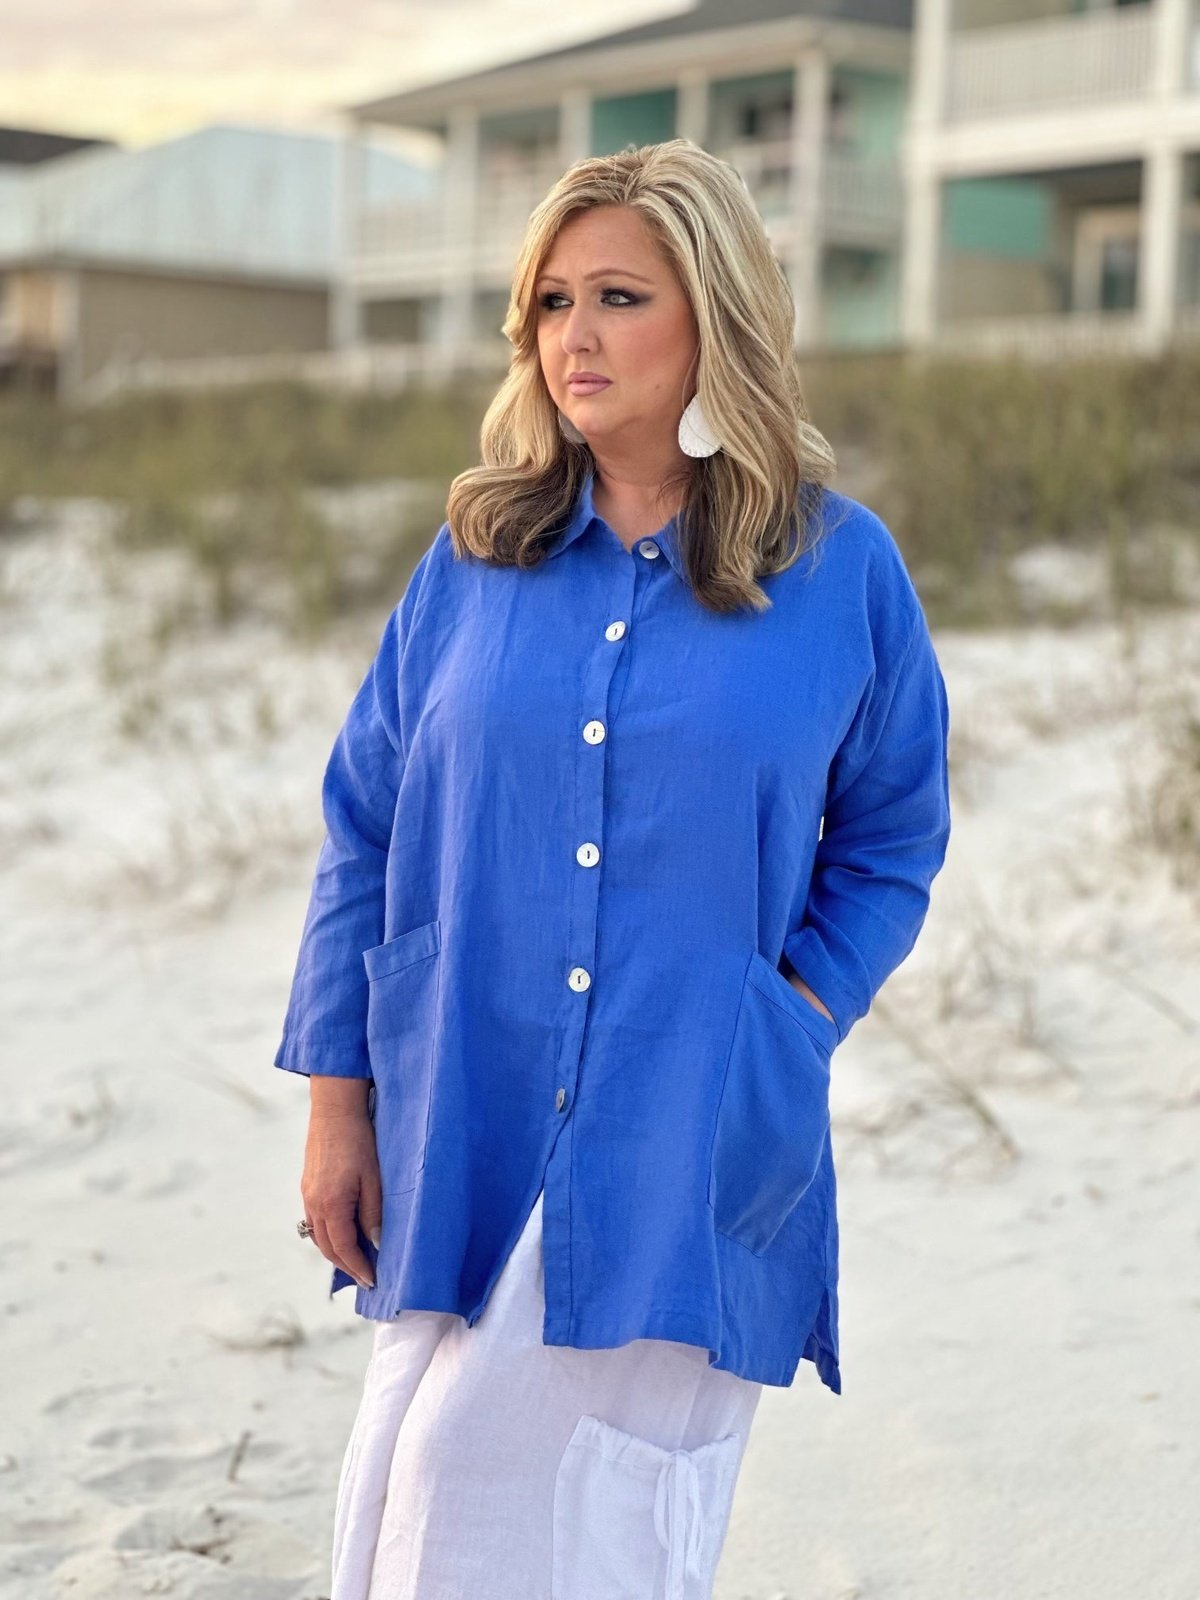 Match Point Plus Periwinkle Collared Shirt